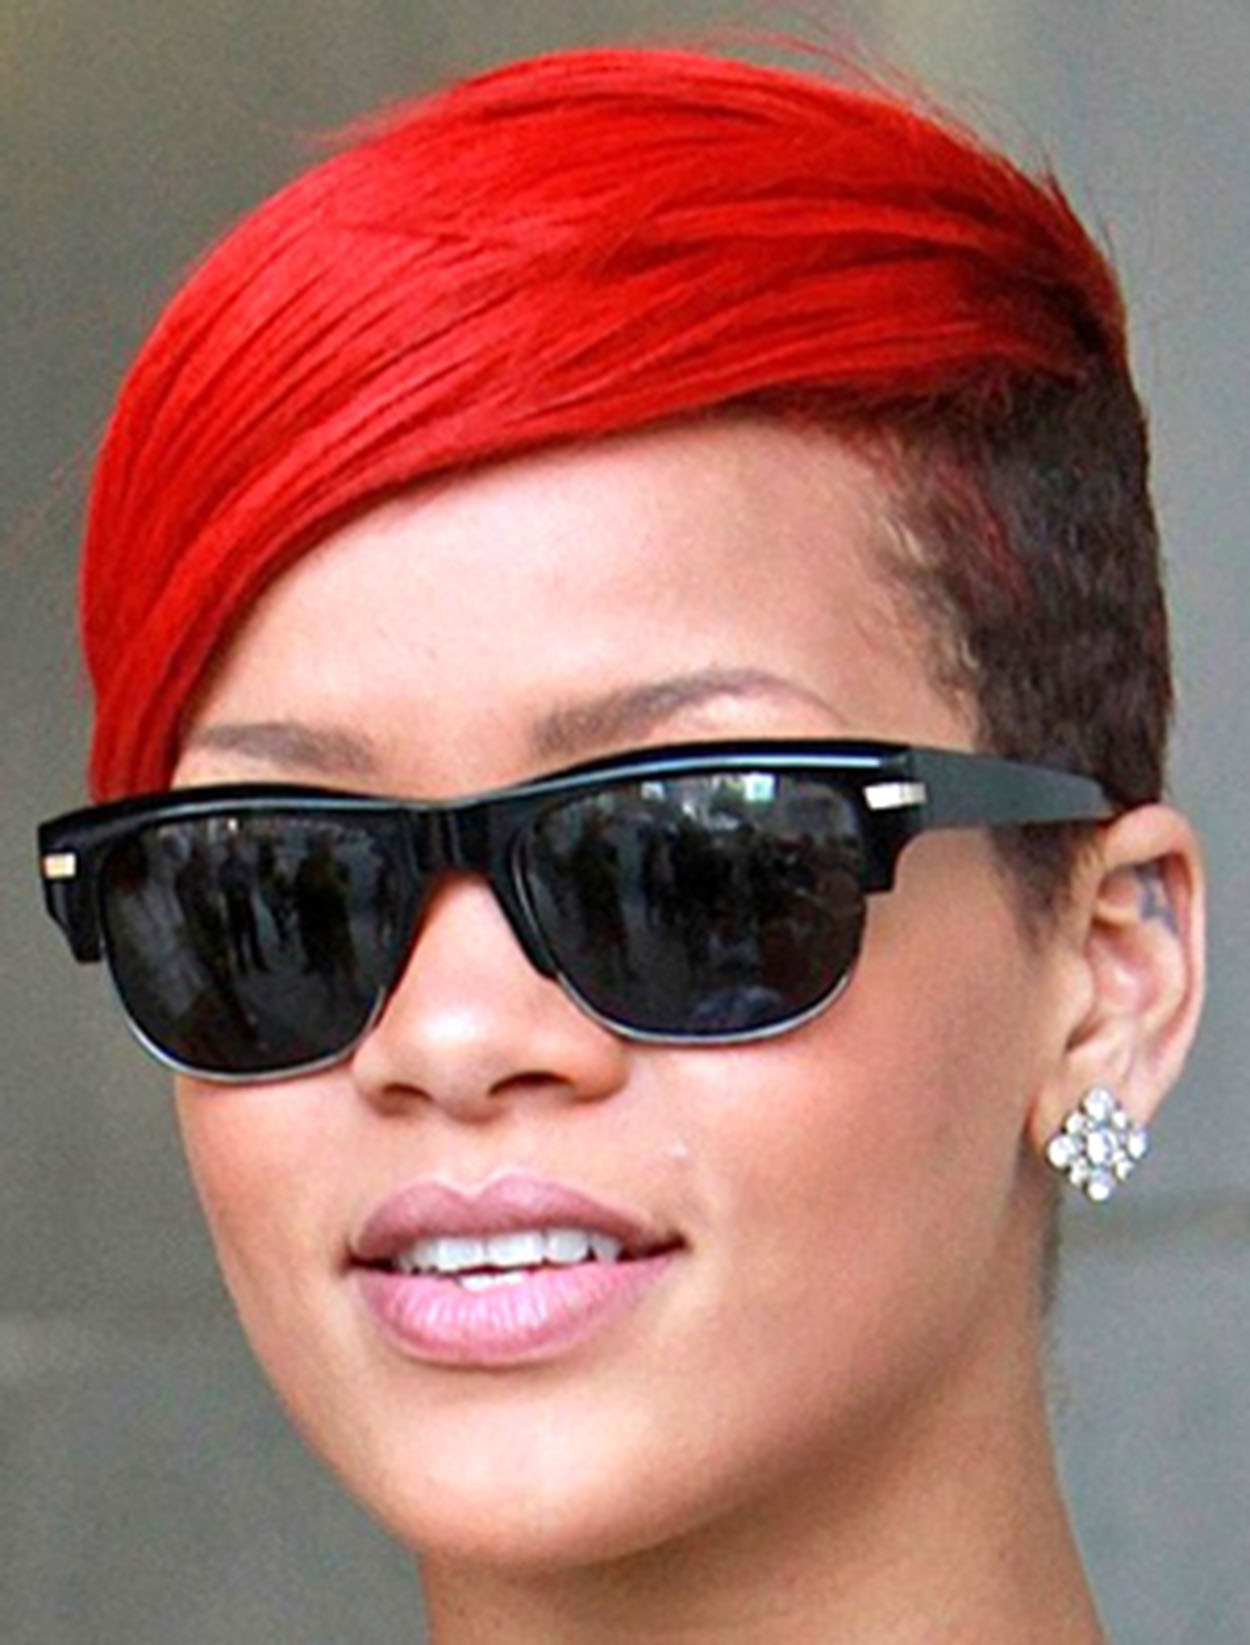 Rihanna-oliver-peoples-sunglasses_the+spectacle-trolley+square-salt+lake+city-DebaDoTell